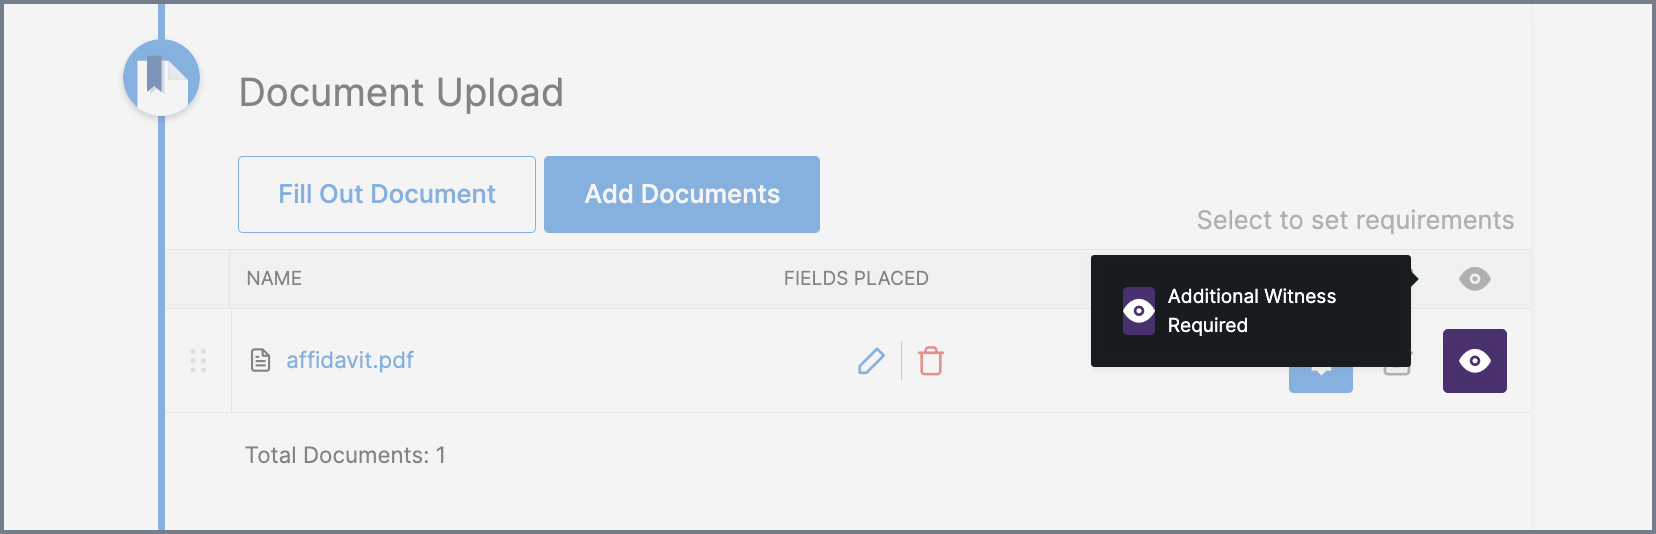 Photo of Required Witness Toggle Turned On in Document Upload